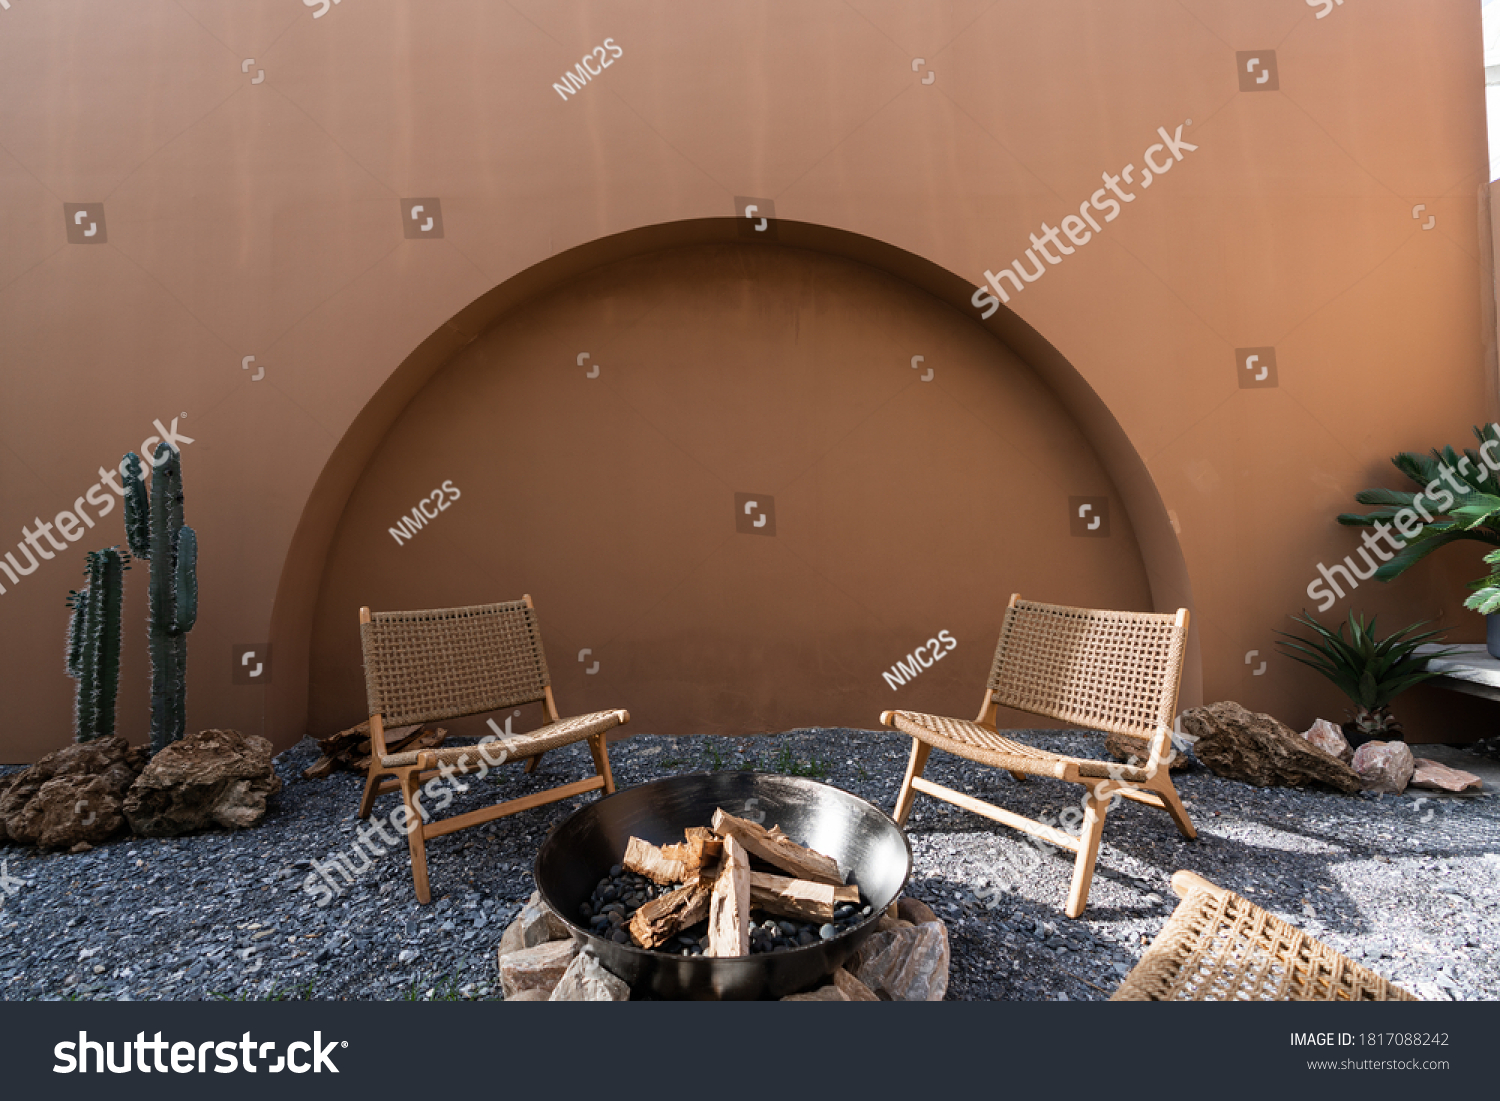 Minimal empty space scene with brown painted wall and  rattan armchair and artificial cactus with rock setting  in natural light scene / studio concept / tropical theme / outdoor studio #1817088242